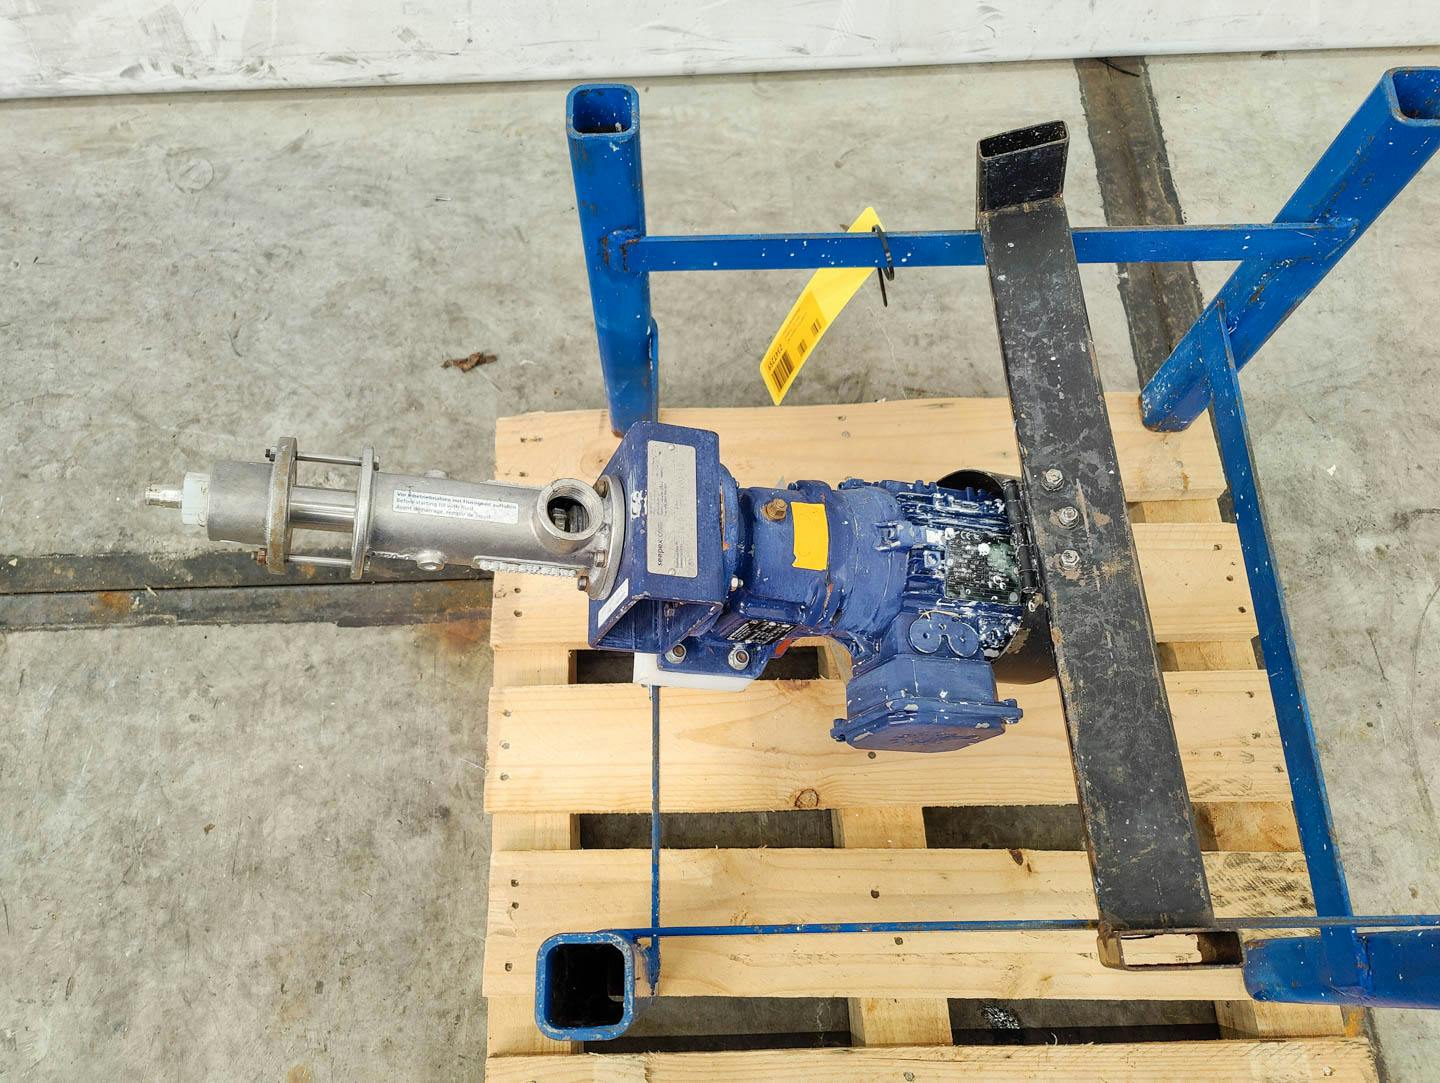 Seepex MD 003-12 - Positive displacement pump - image 5